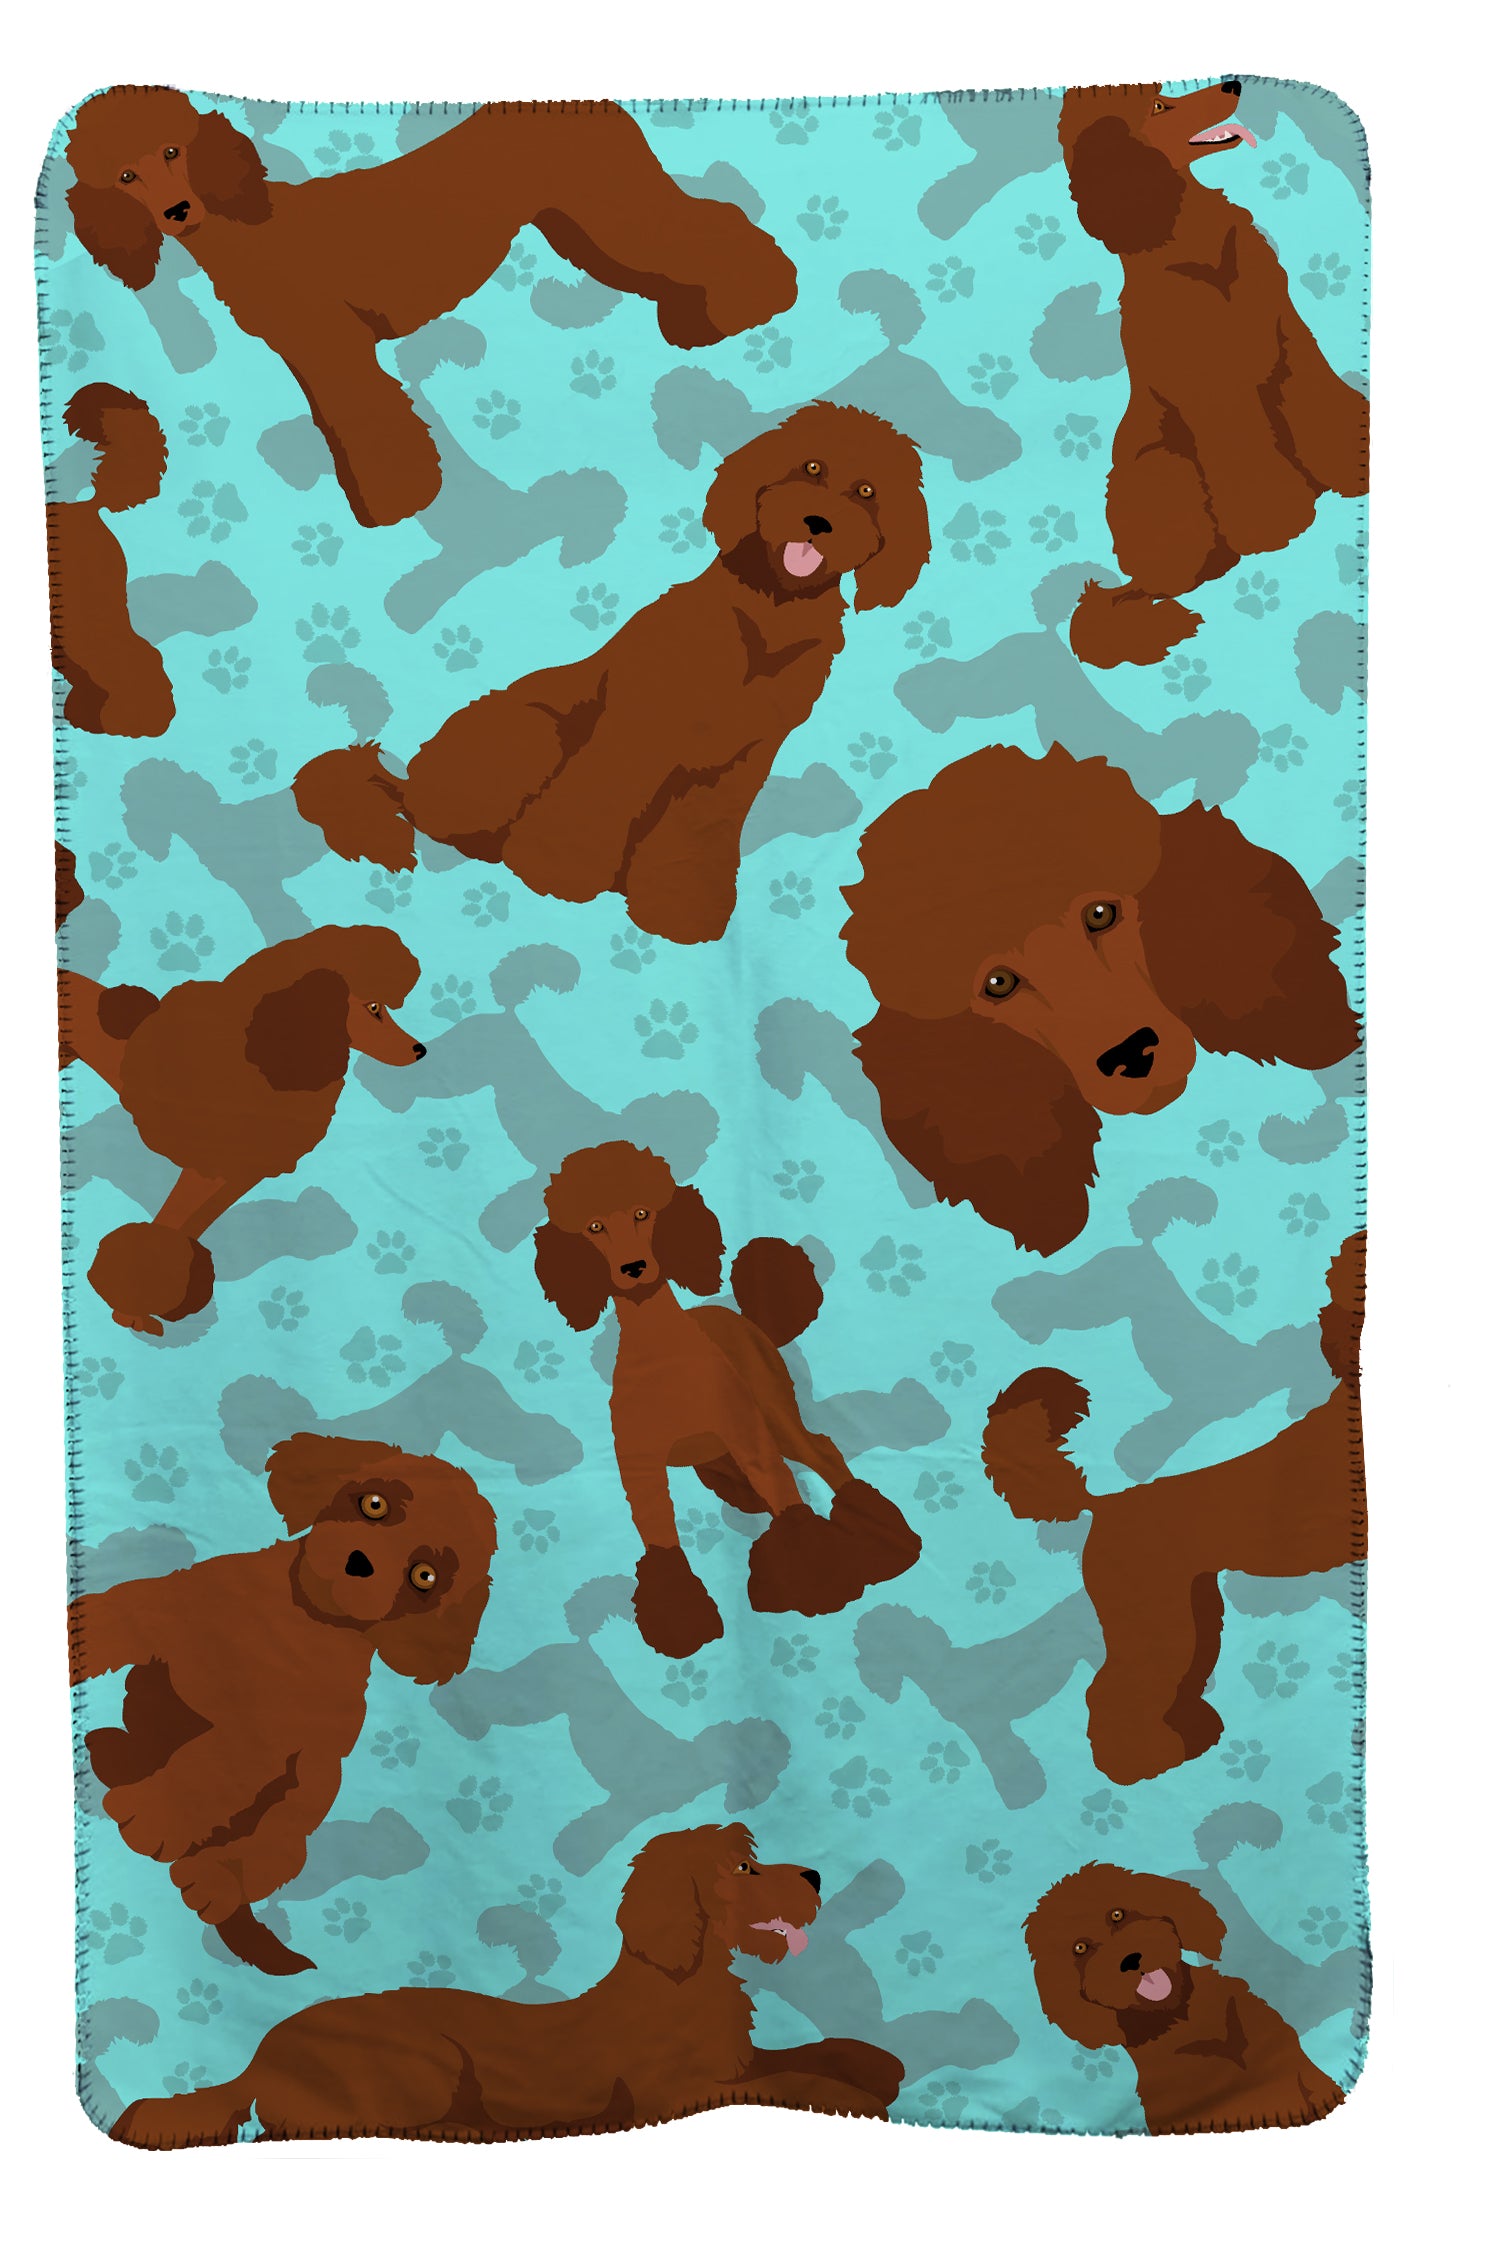 Buy this Chocolate Standard Poodle Soft Travel Blanket with Bag